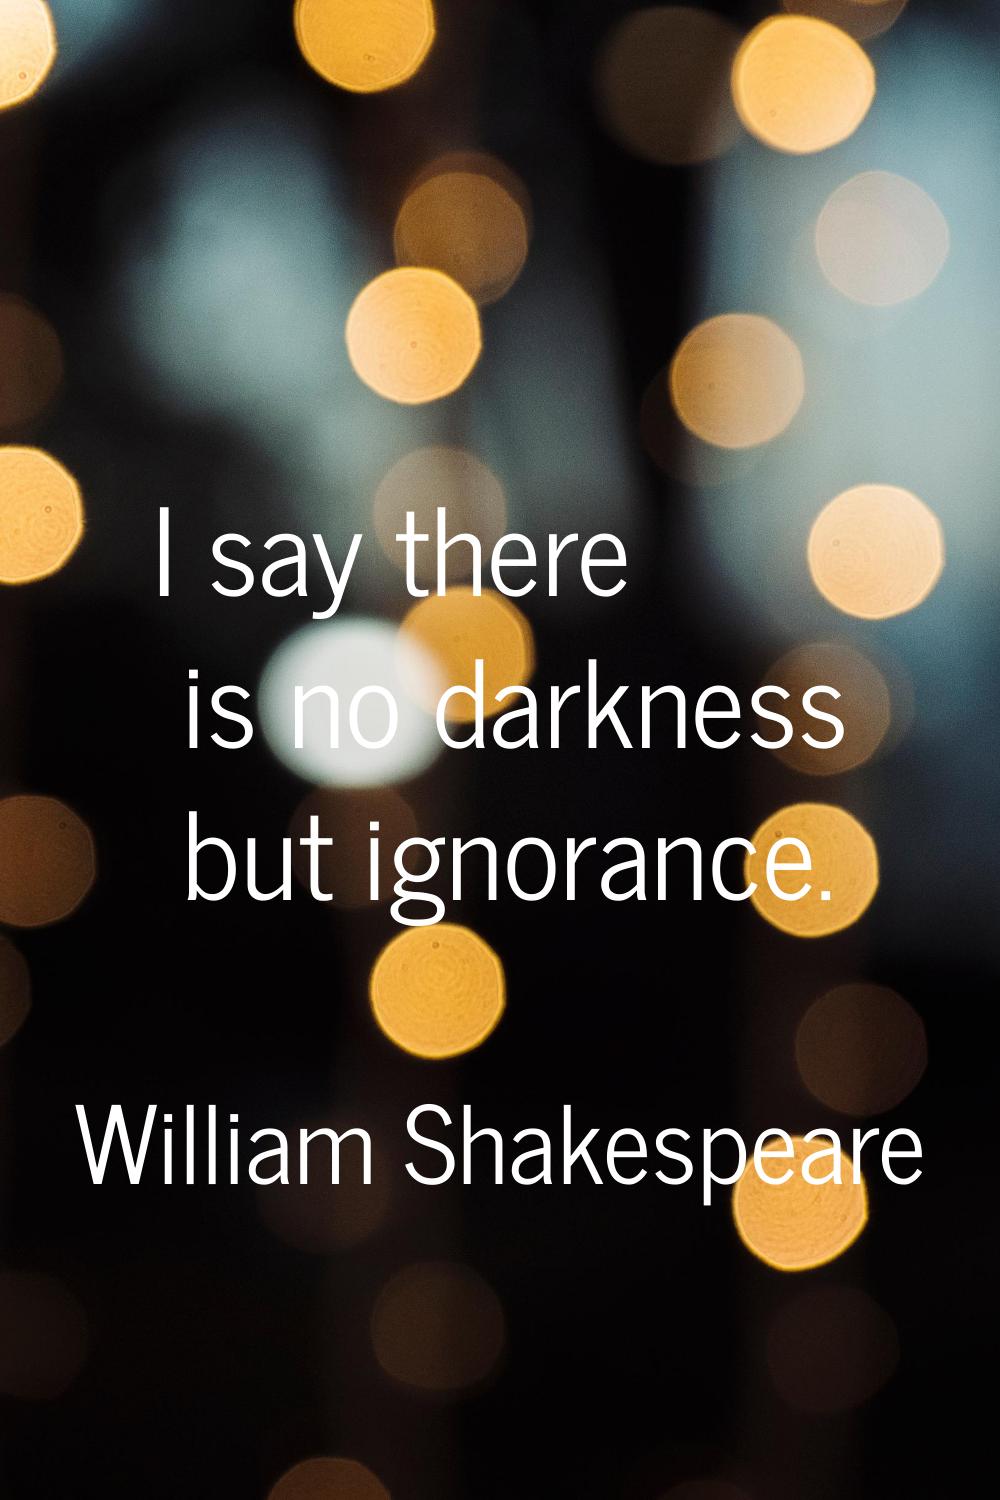 I say there is no darkness but ignorance.